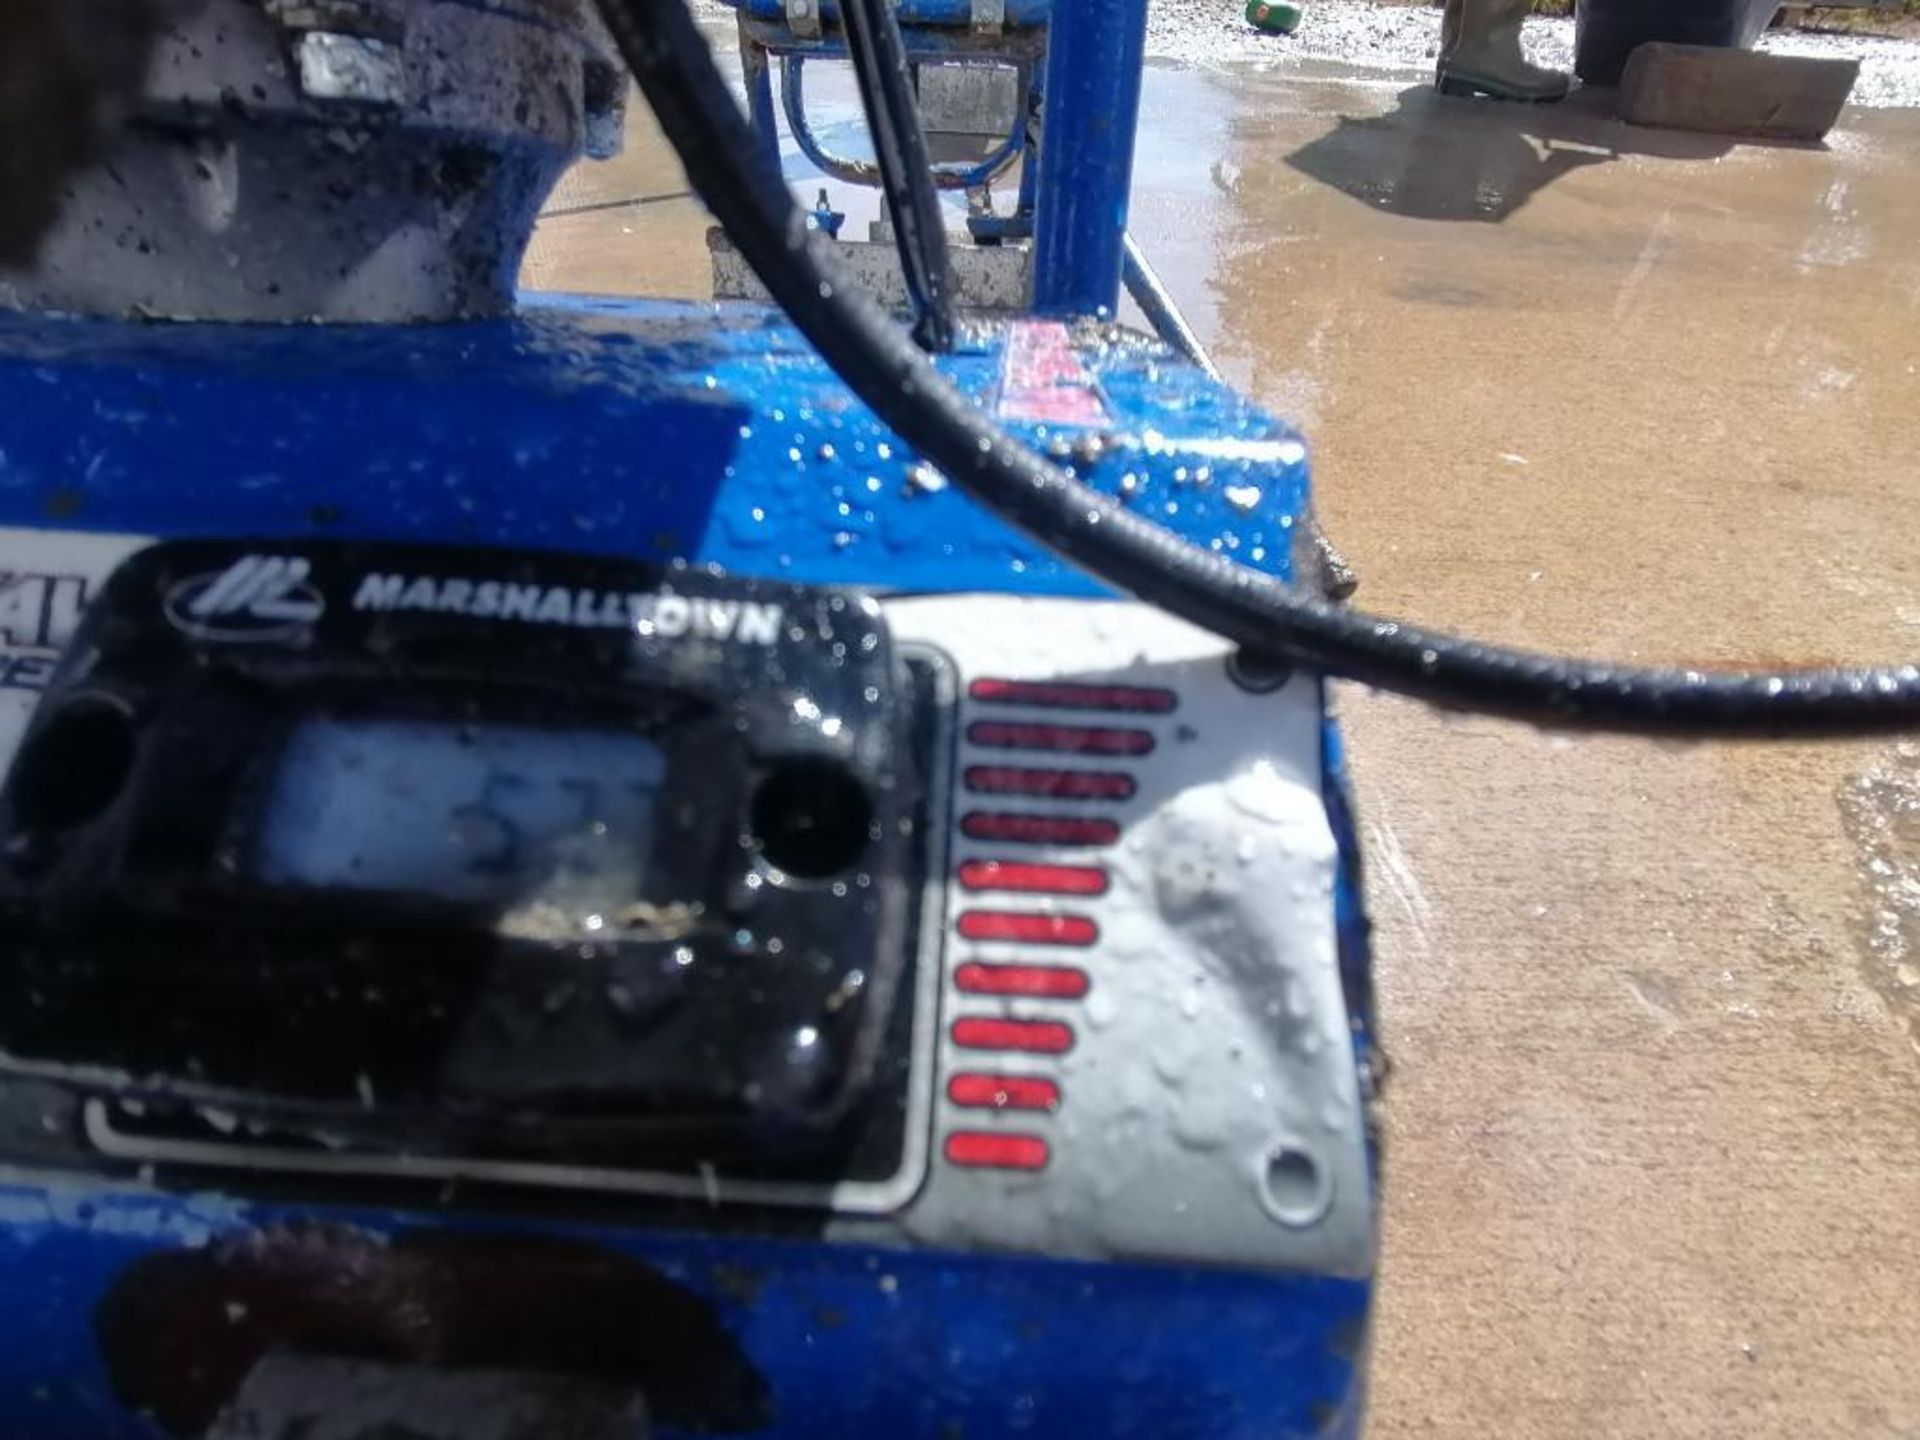 Shockwave Power Screed with Honda GX35 Motor. Serial #6056, 52.7 Hours. Located in Mt. Pleasant, IA - Image 5 of 7